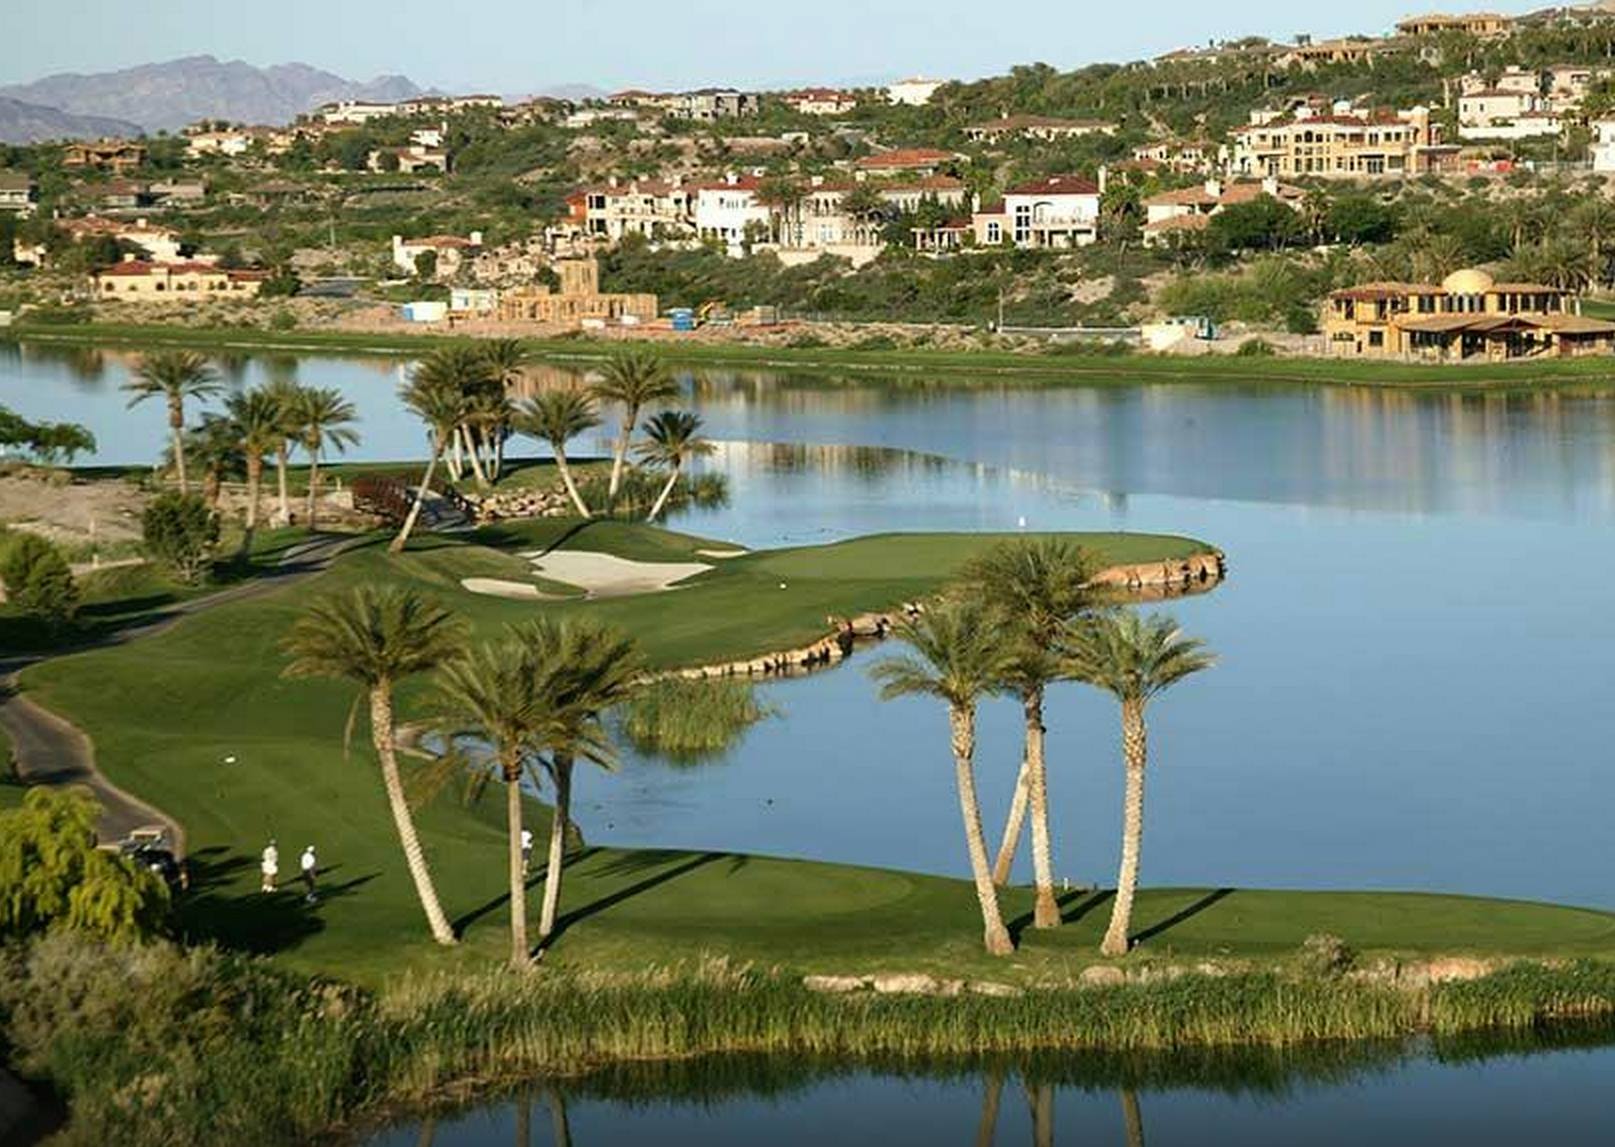 Experience a Golf Vacation to Lake Las Vegas